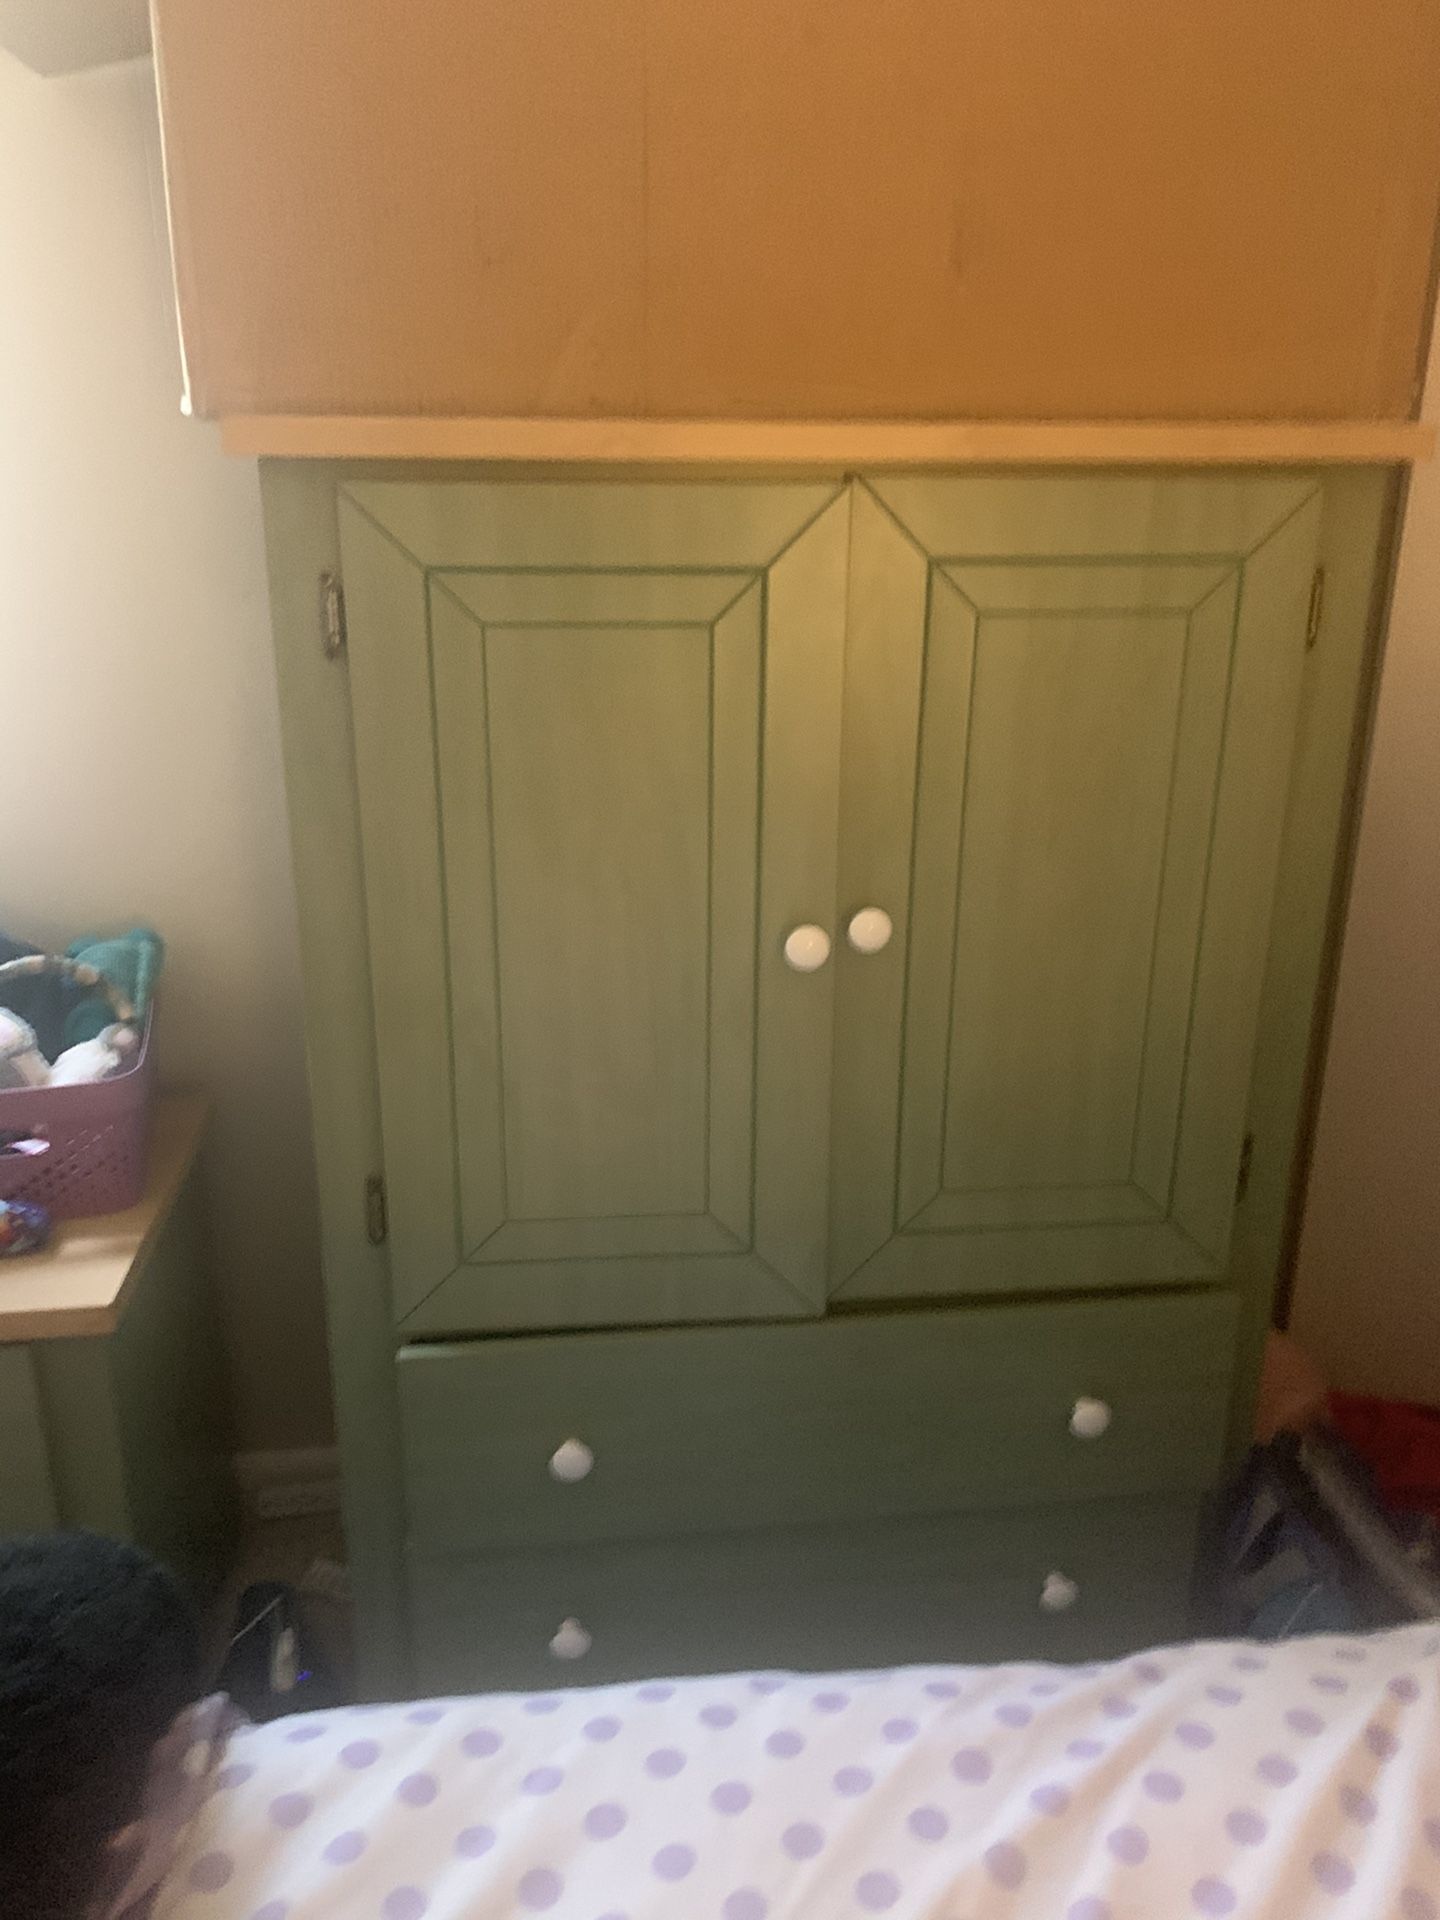 Free Kids bedroom furniture (mattress not included)